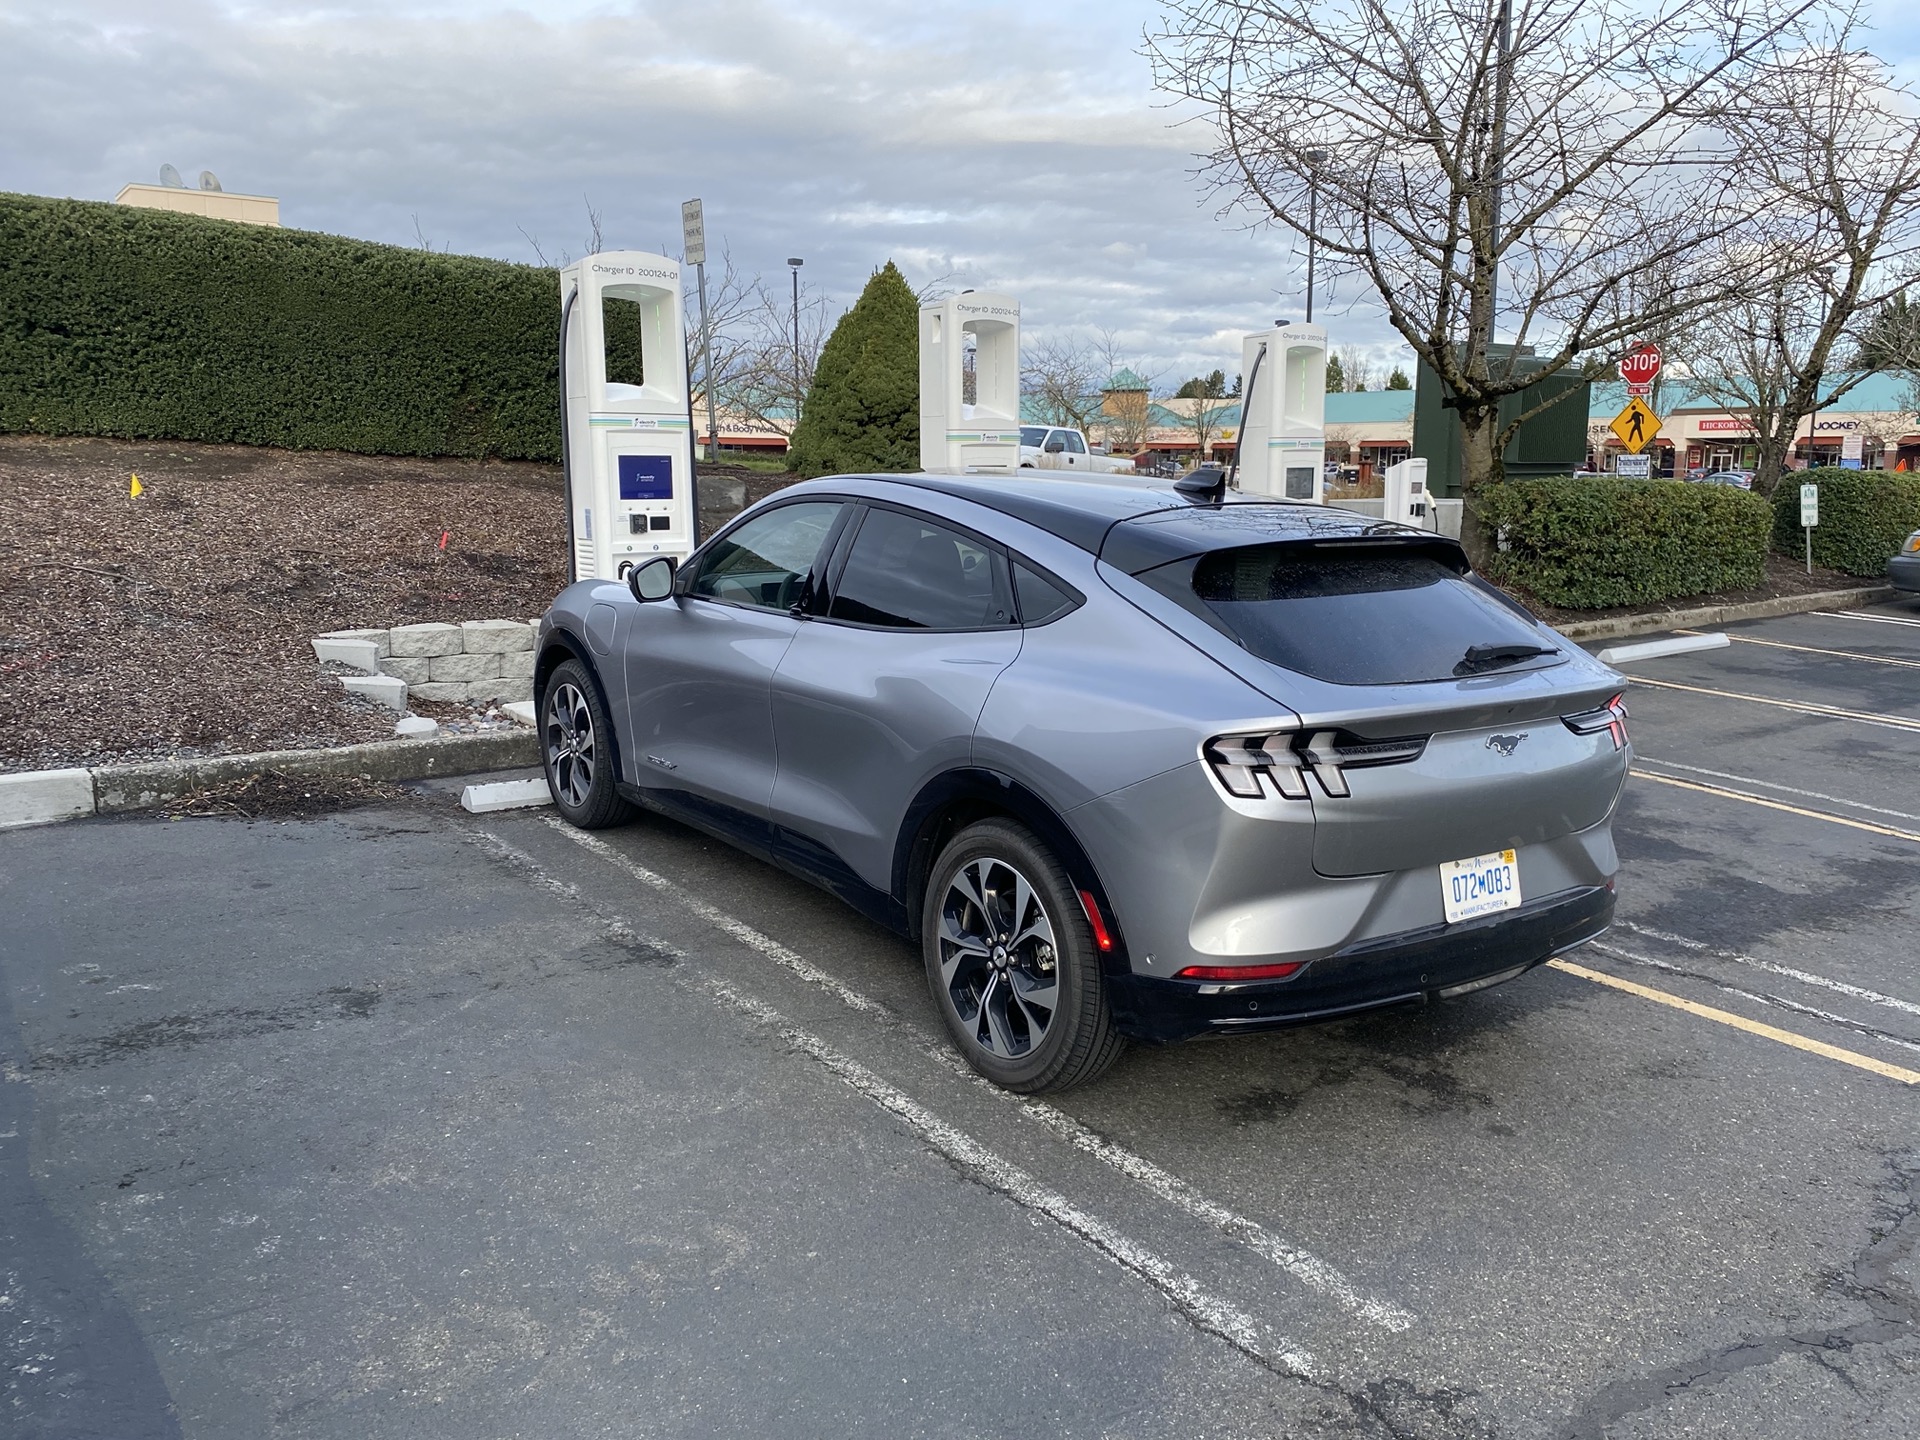 2021 Mustang Mach-E: How fast does the Ford EV charge up on road trips?